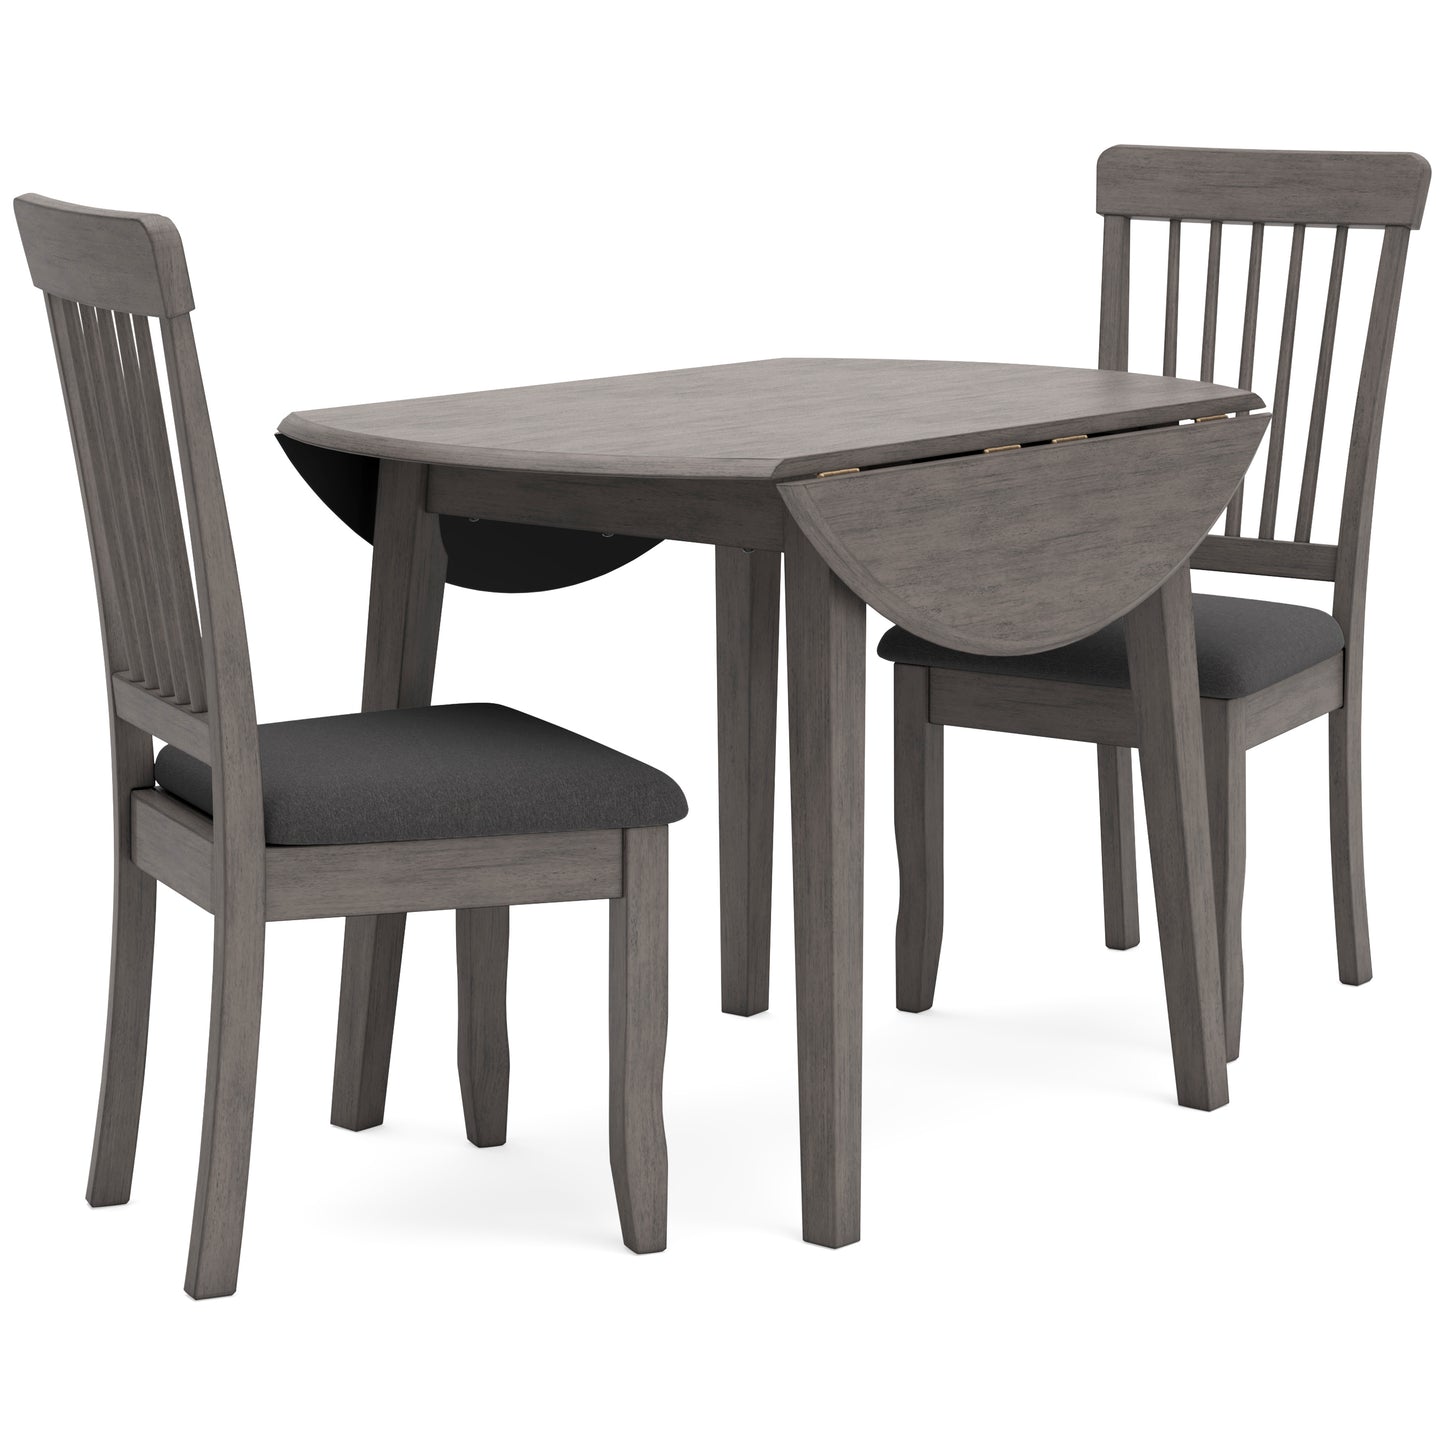 Shullden Drop Leaf Dining Table and Two Chairs